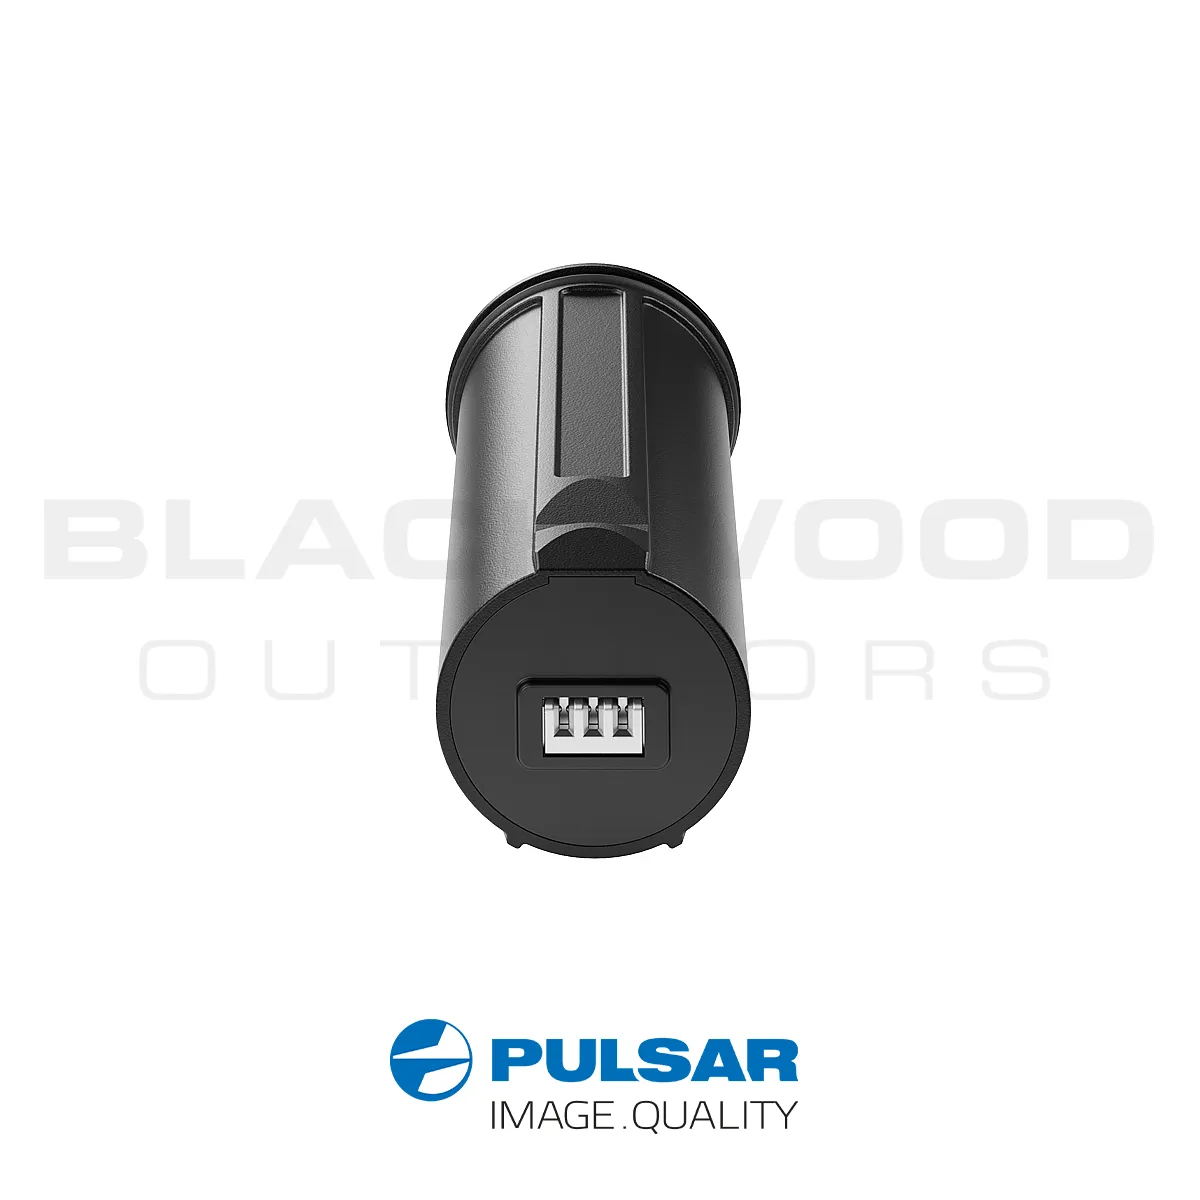 Pulsar APS3 battery for thermion, digex and Axion XM30F models